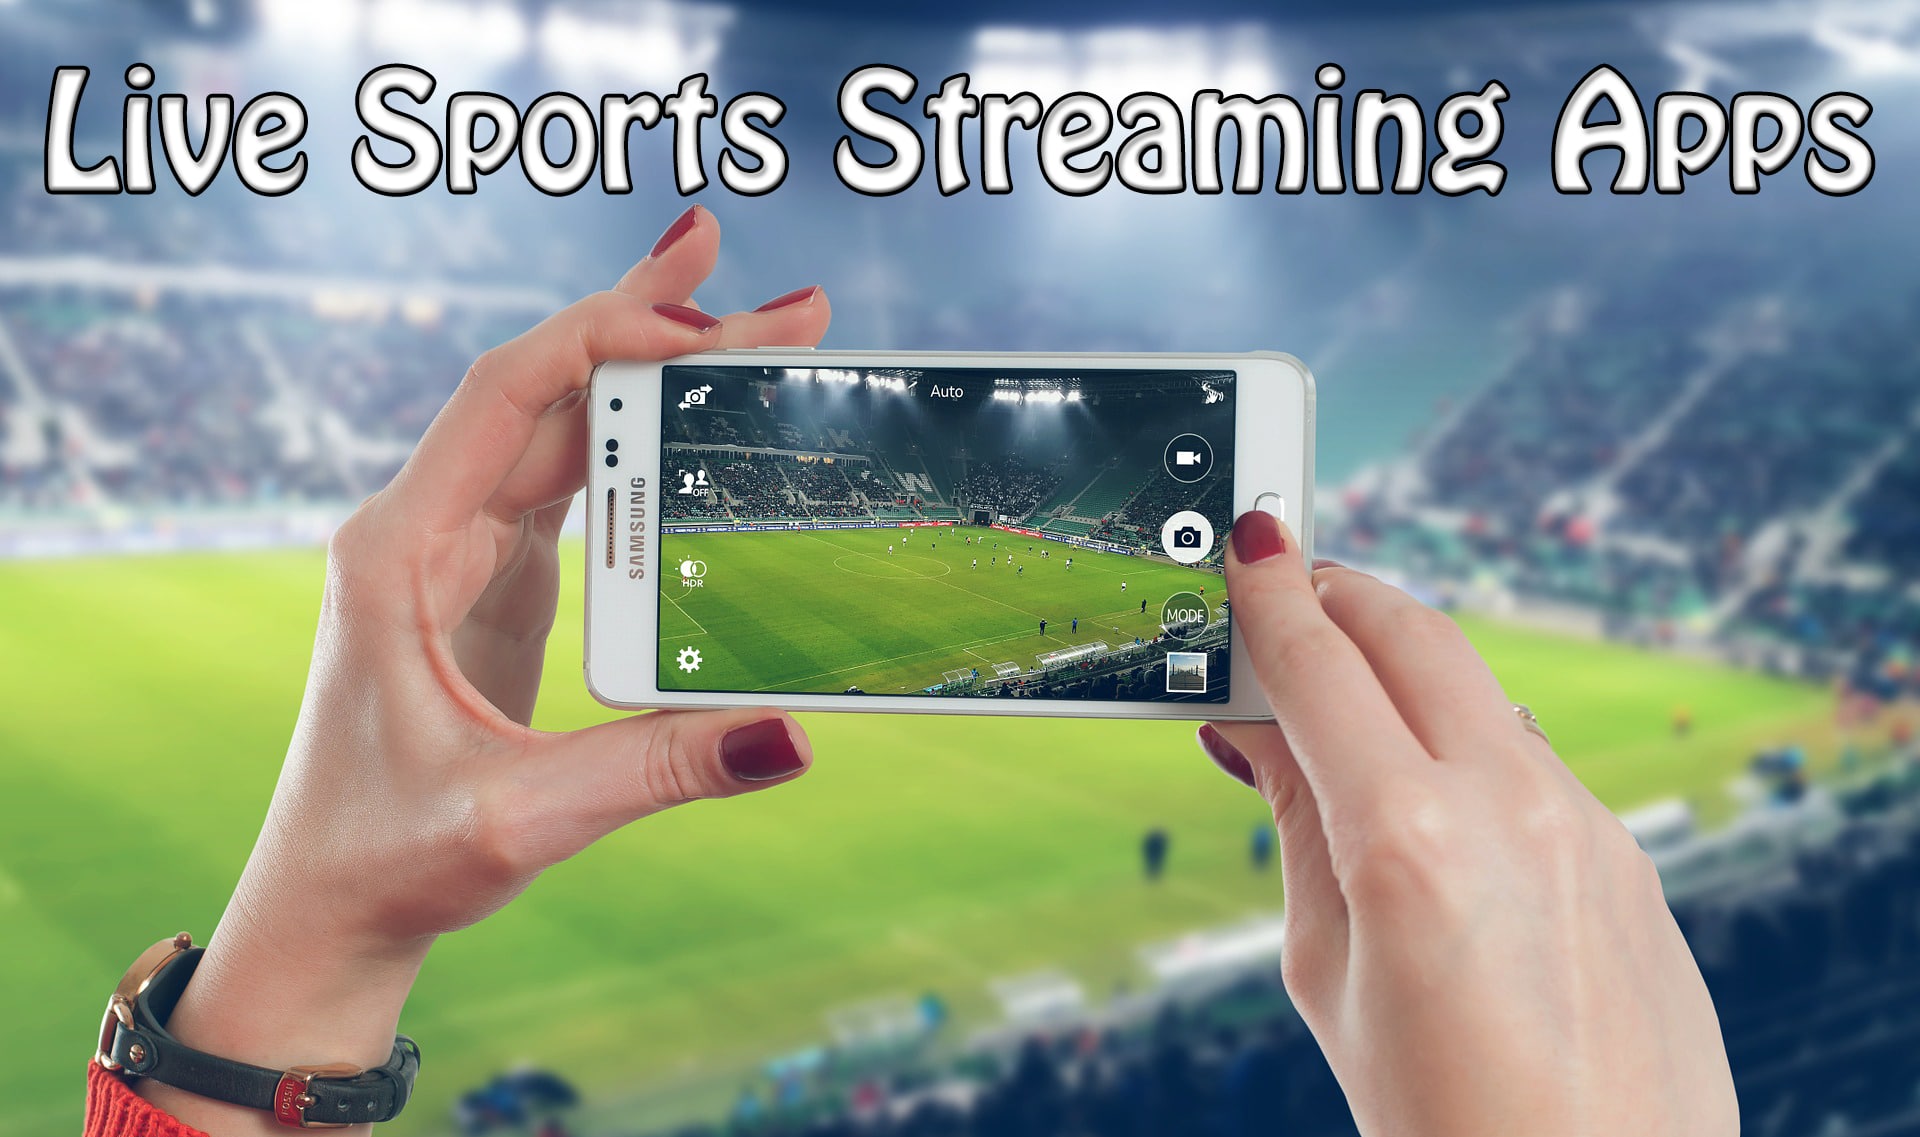 These Are The Top 6 Best Live Sports Streaming Apps